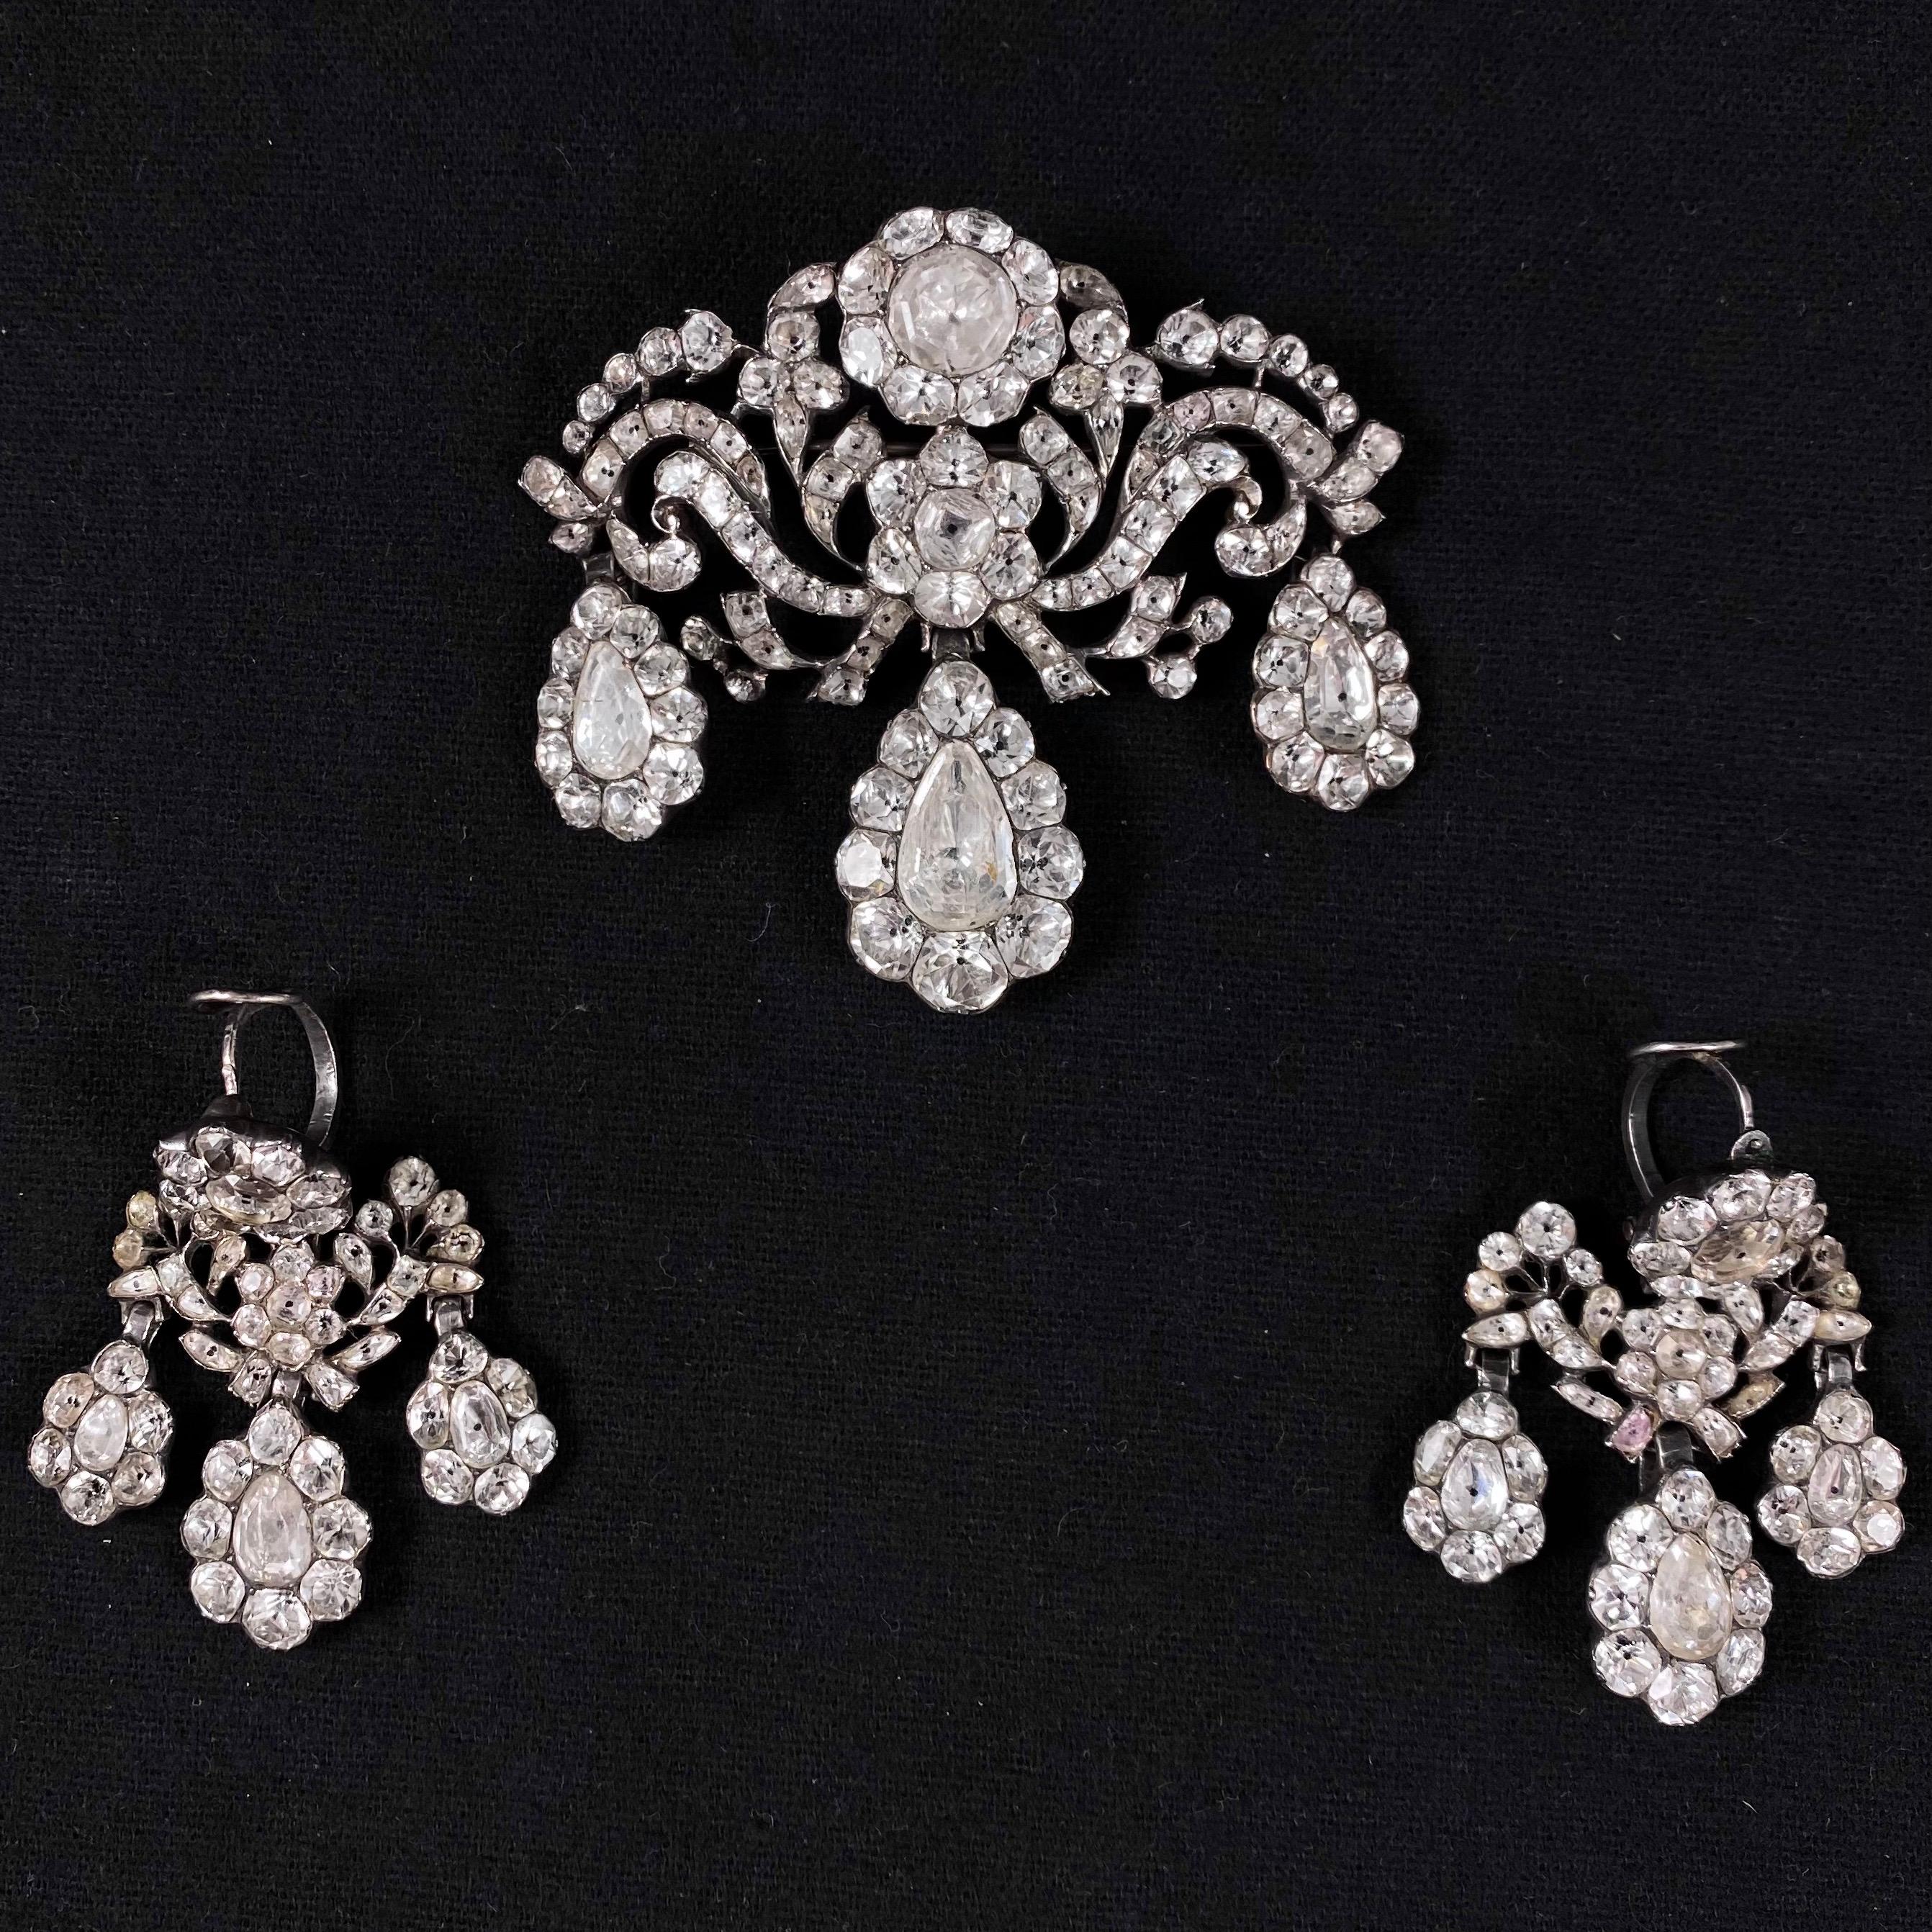 Museum-quality rare and important antique 18th century Minas Novas rock crystal quartz girandole pendant and earrings demi-parure mounted in closed-back silver, Portuguese, circa 1770, fitted in an antique case. From the second half of the